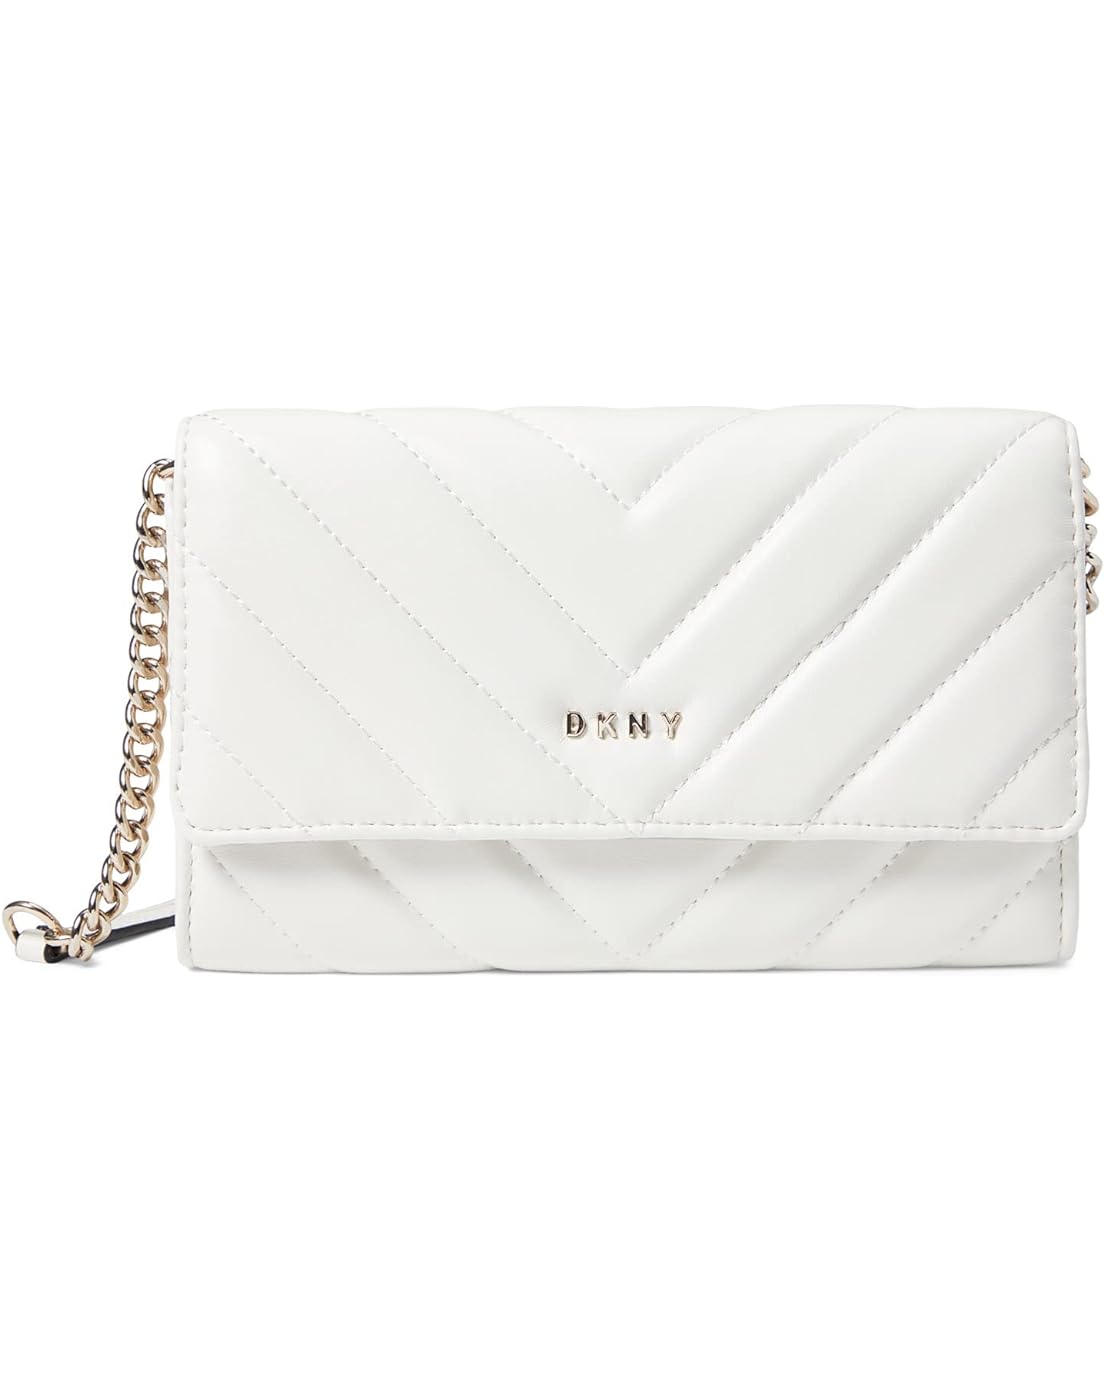 DKNY Veronica Wallet On A Chain